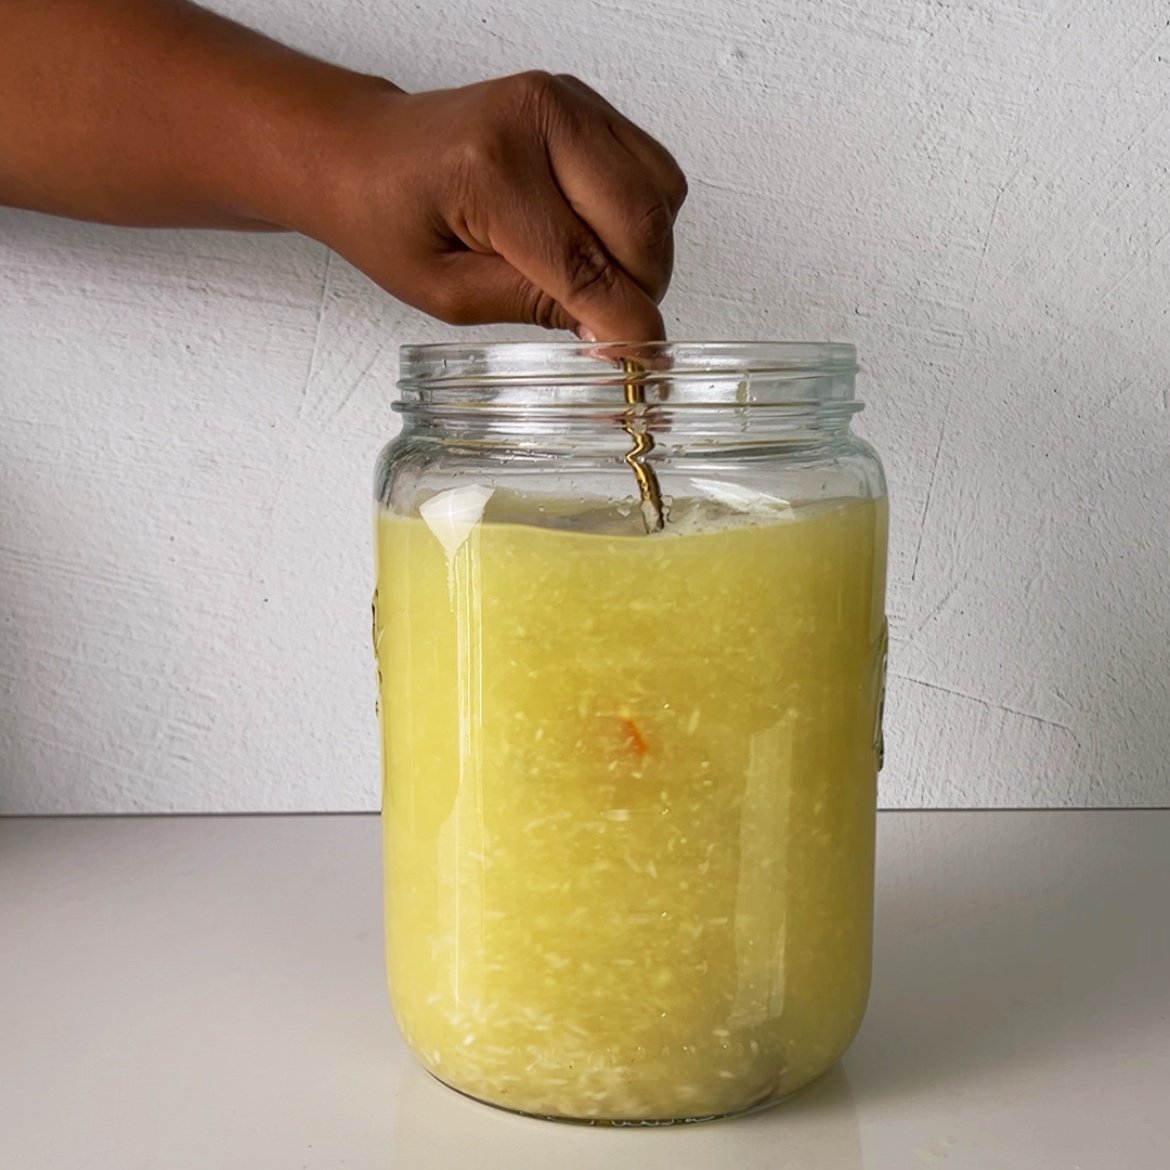 Brown hands stirring a mason jar filled to the top with grated ginger and water